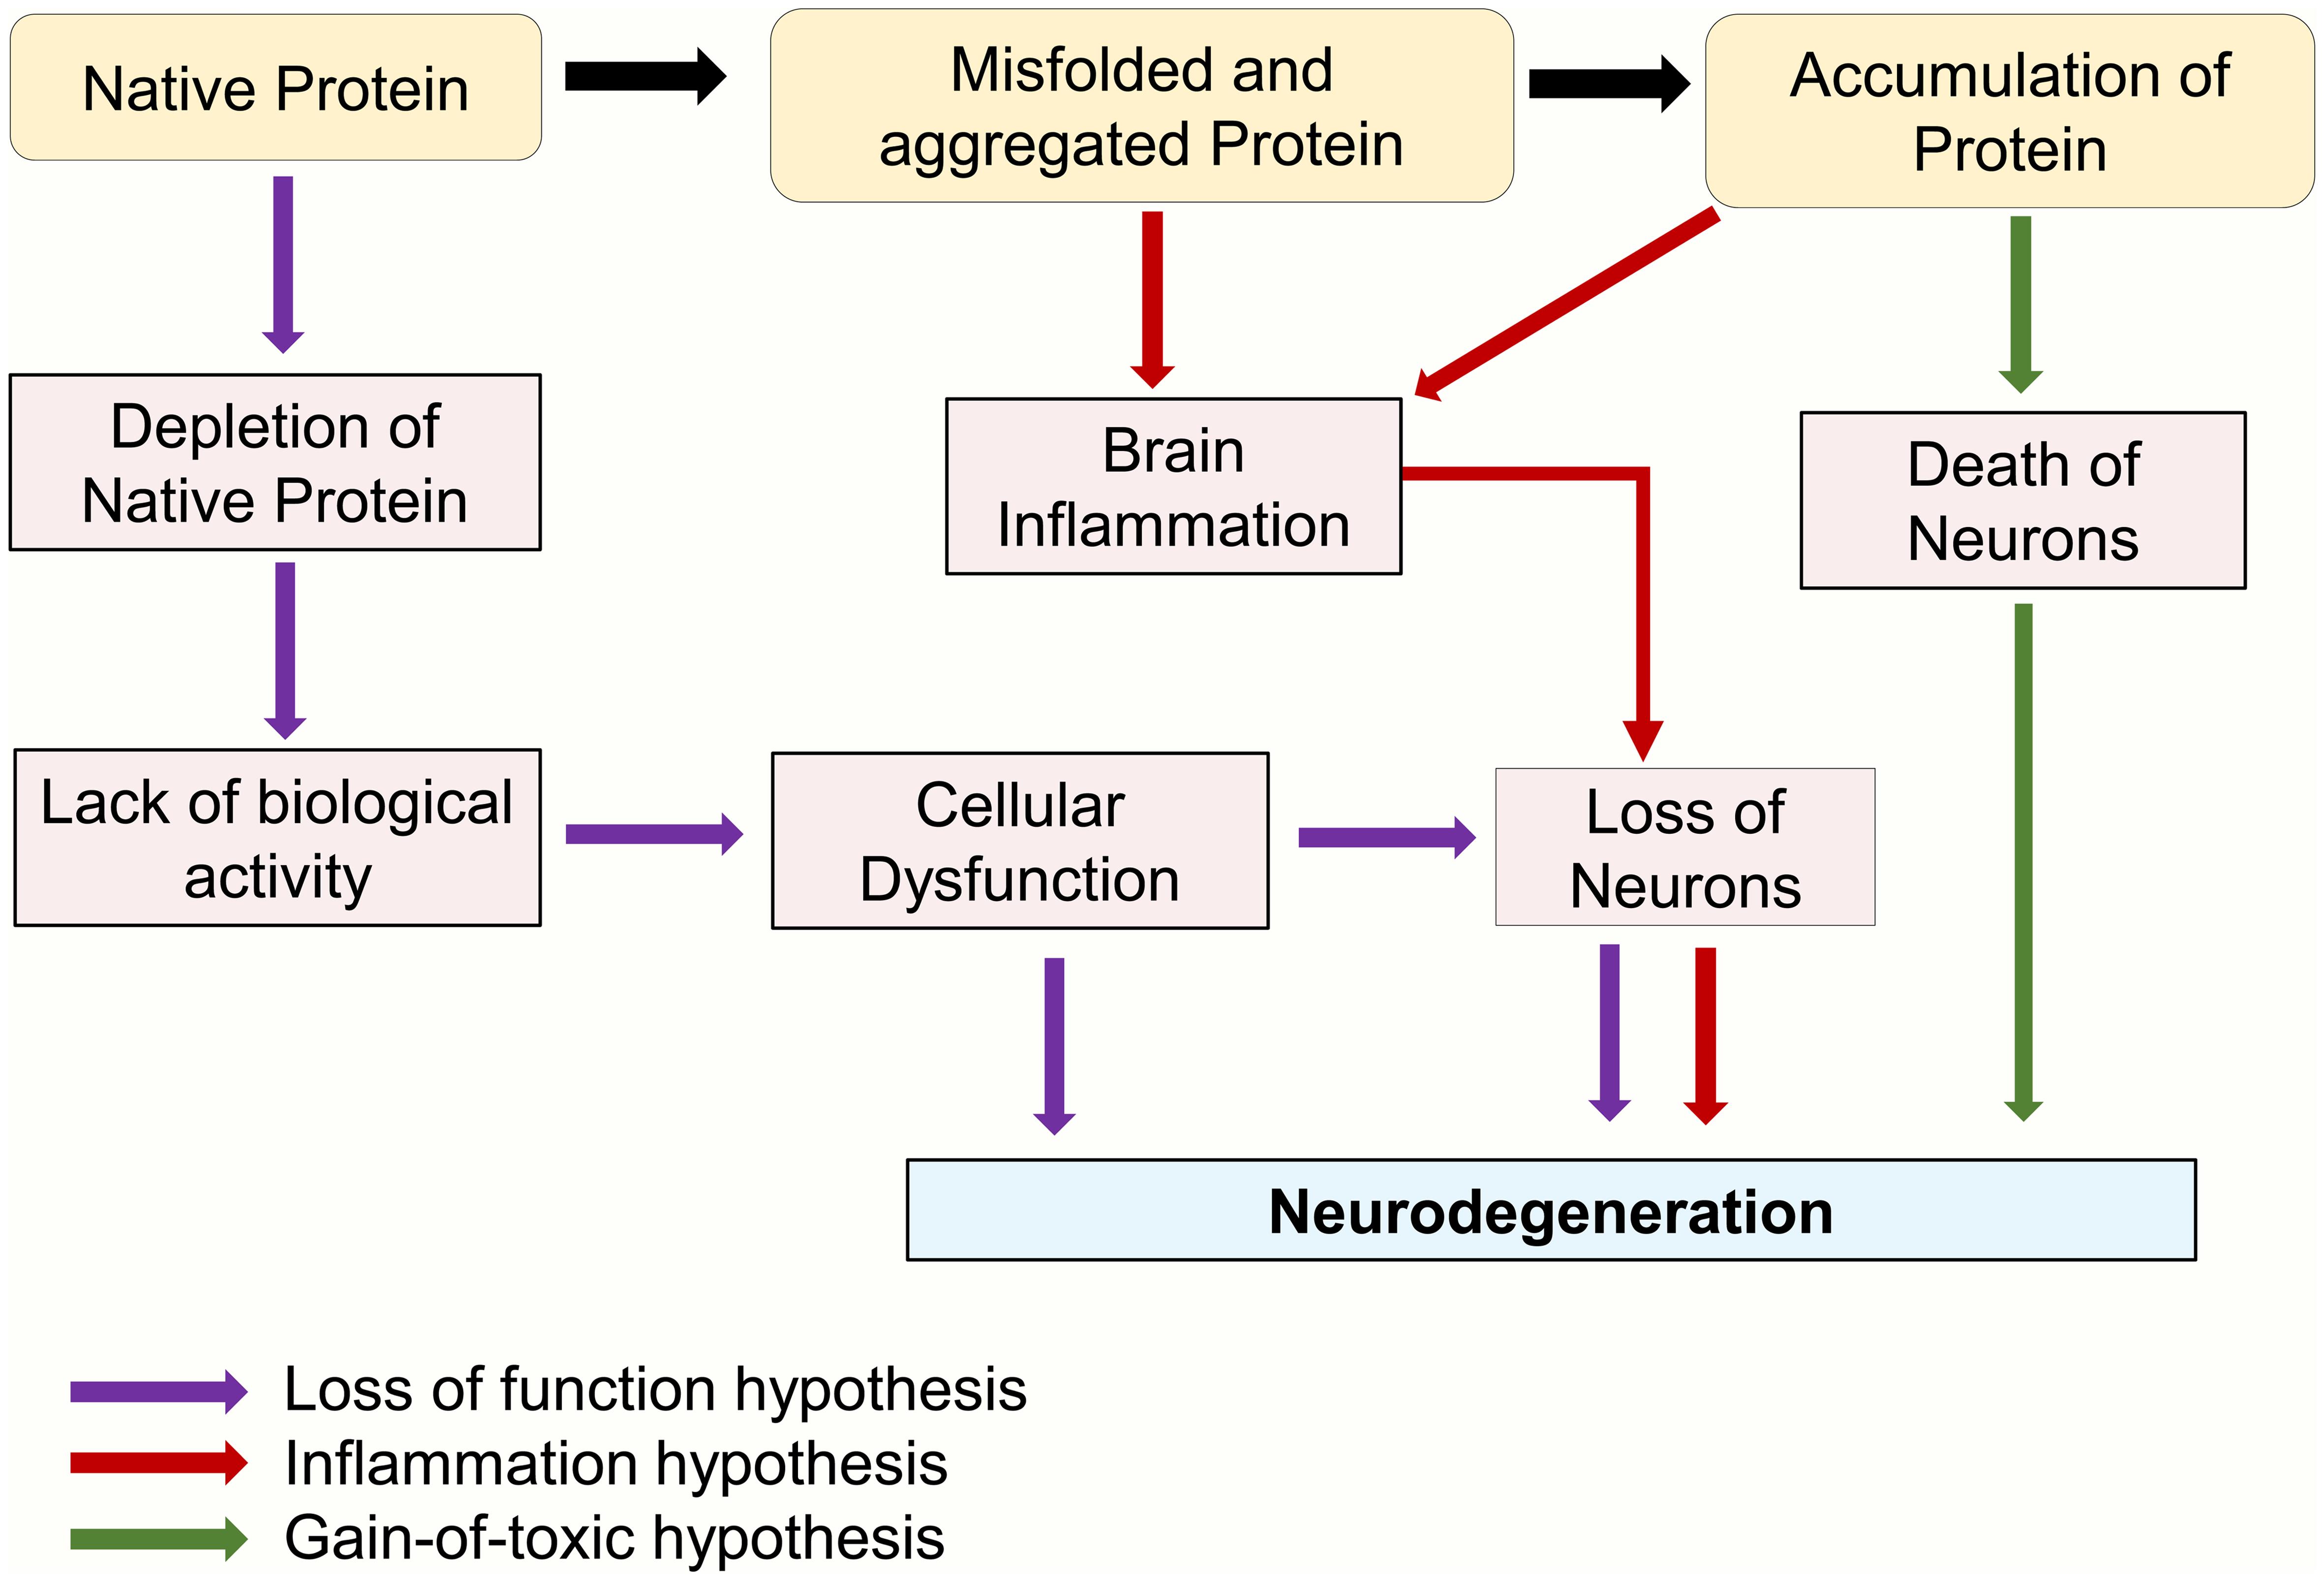 Illustrating models depicting the mechanism of neurodegeneration linked to the misfolding and aggregation of proteins.